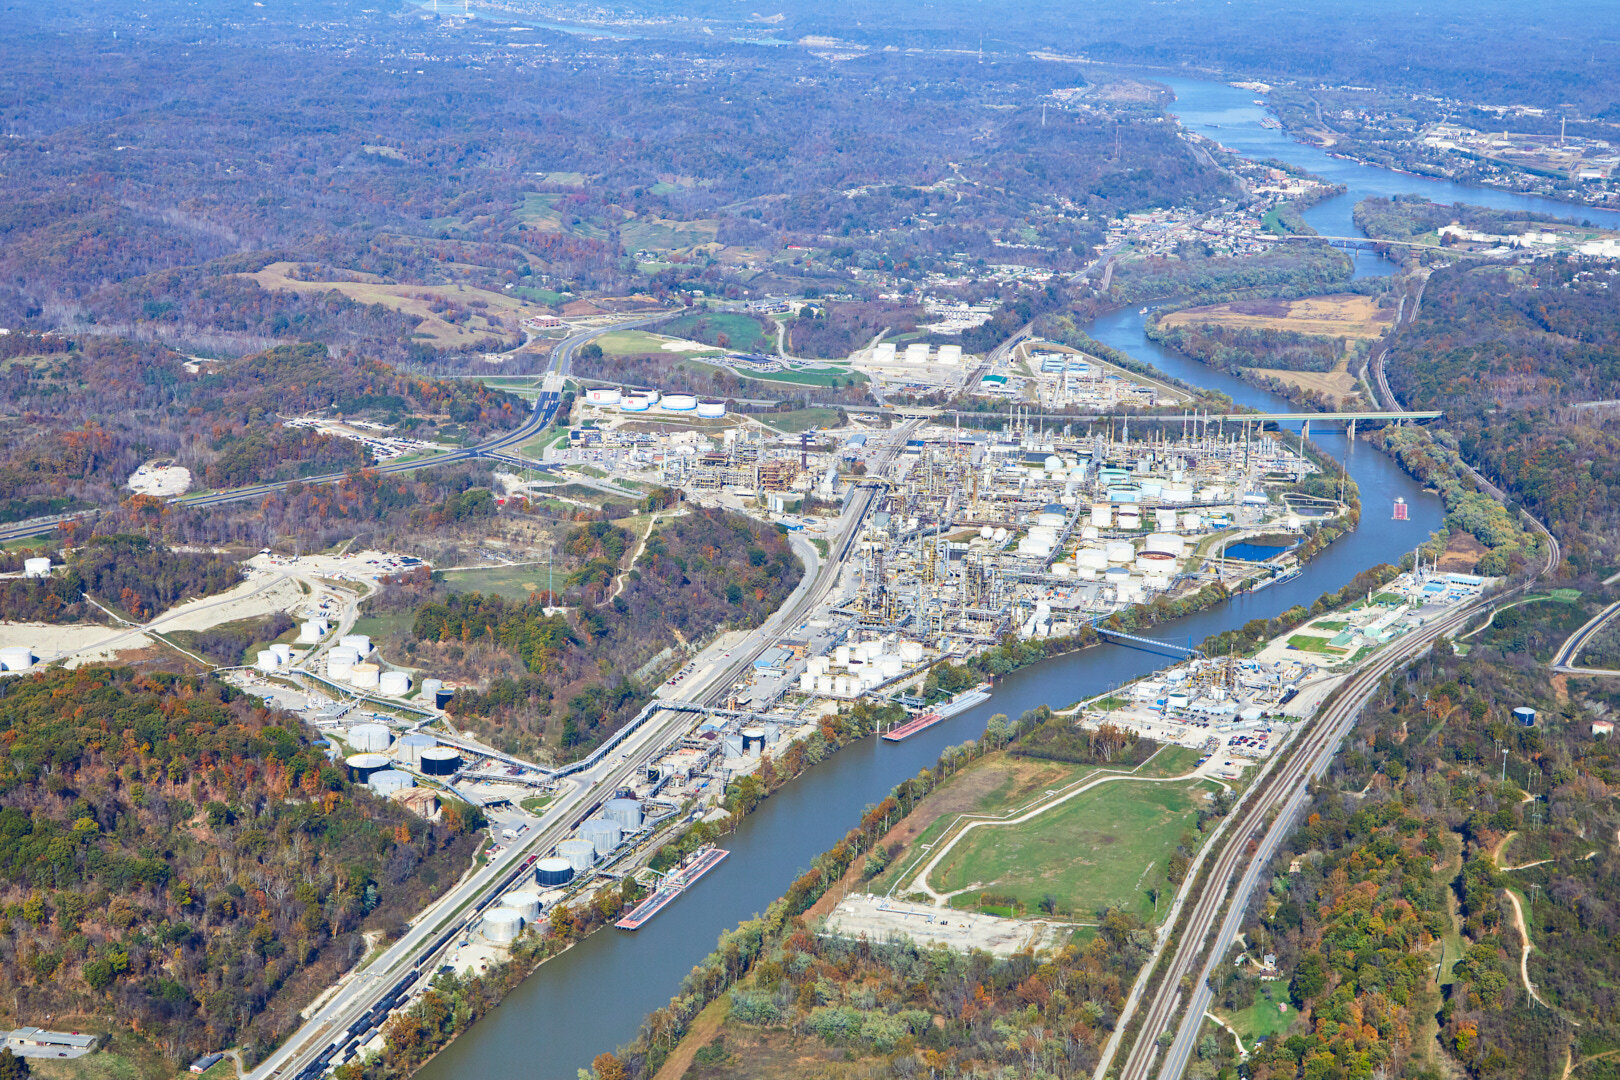 Marathon Refinery at Catlettsburg, KY looking toward the confluence of the Big Sandy with the Ohio River at Ashland